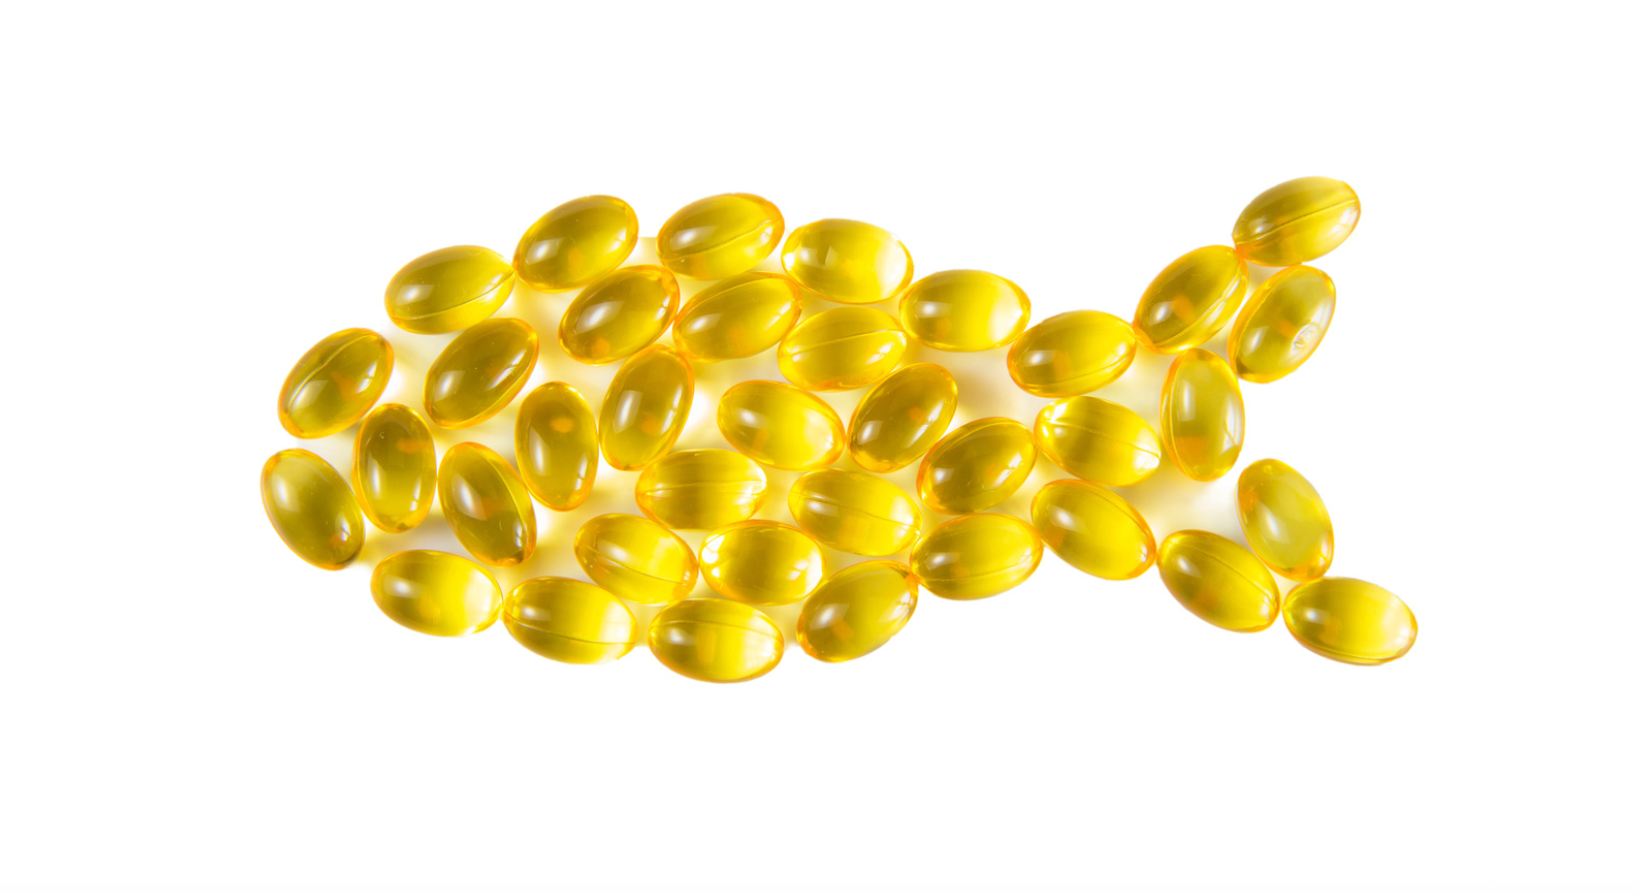 Highly Purified Fish Oil May Help Prevent Cardiovascular Events